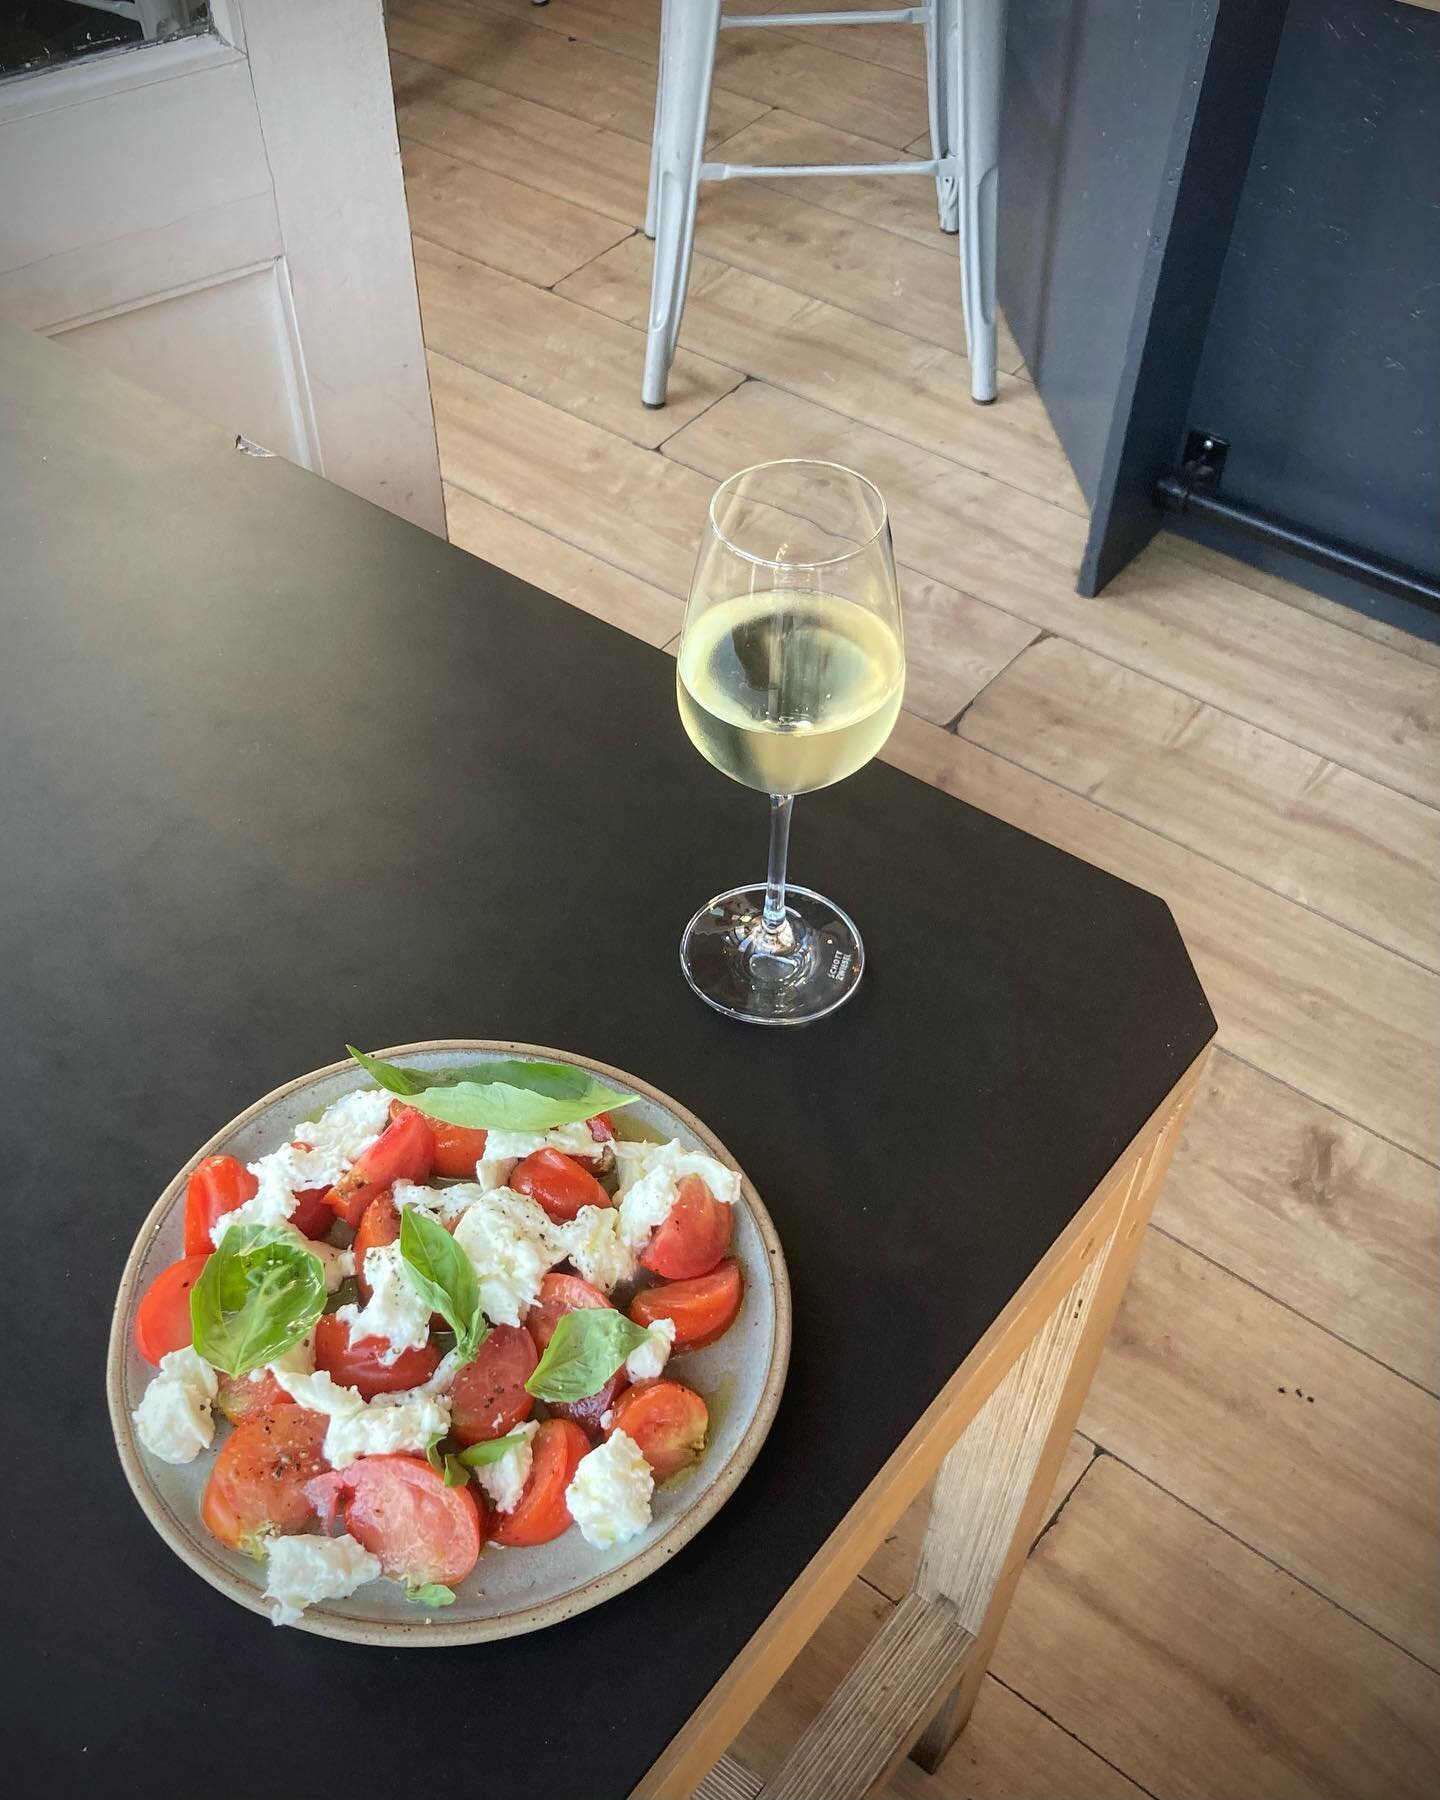 WE HEART TOMATOES⁣
⁣
A beautiful plate of @nancealverne heart tomatoes, grown 0.75 miles away.. ⁣❤️ 🍅 
⁣
served here with some creamy, luscious bufala mozzarella and a vivid, dry and intense white wine from vines 750m up on the slopes of Mount Etna&